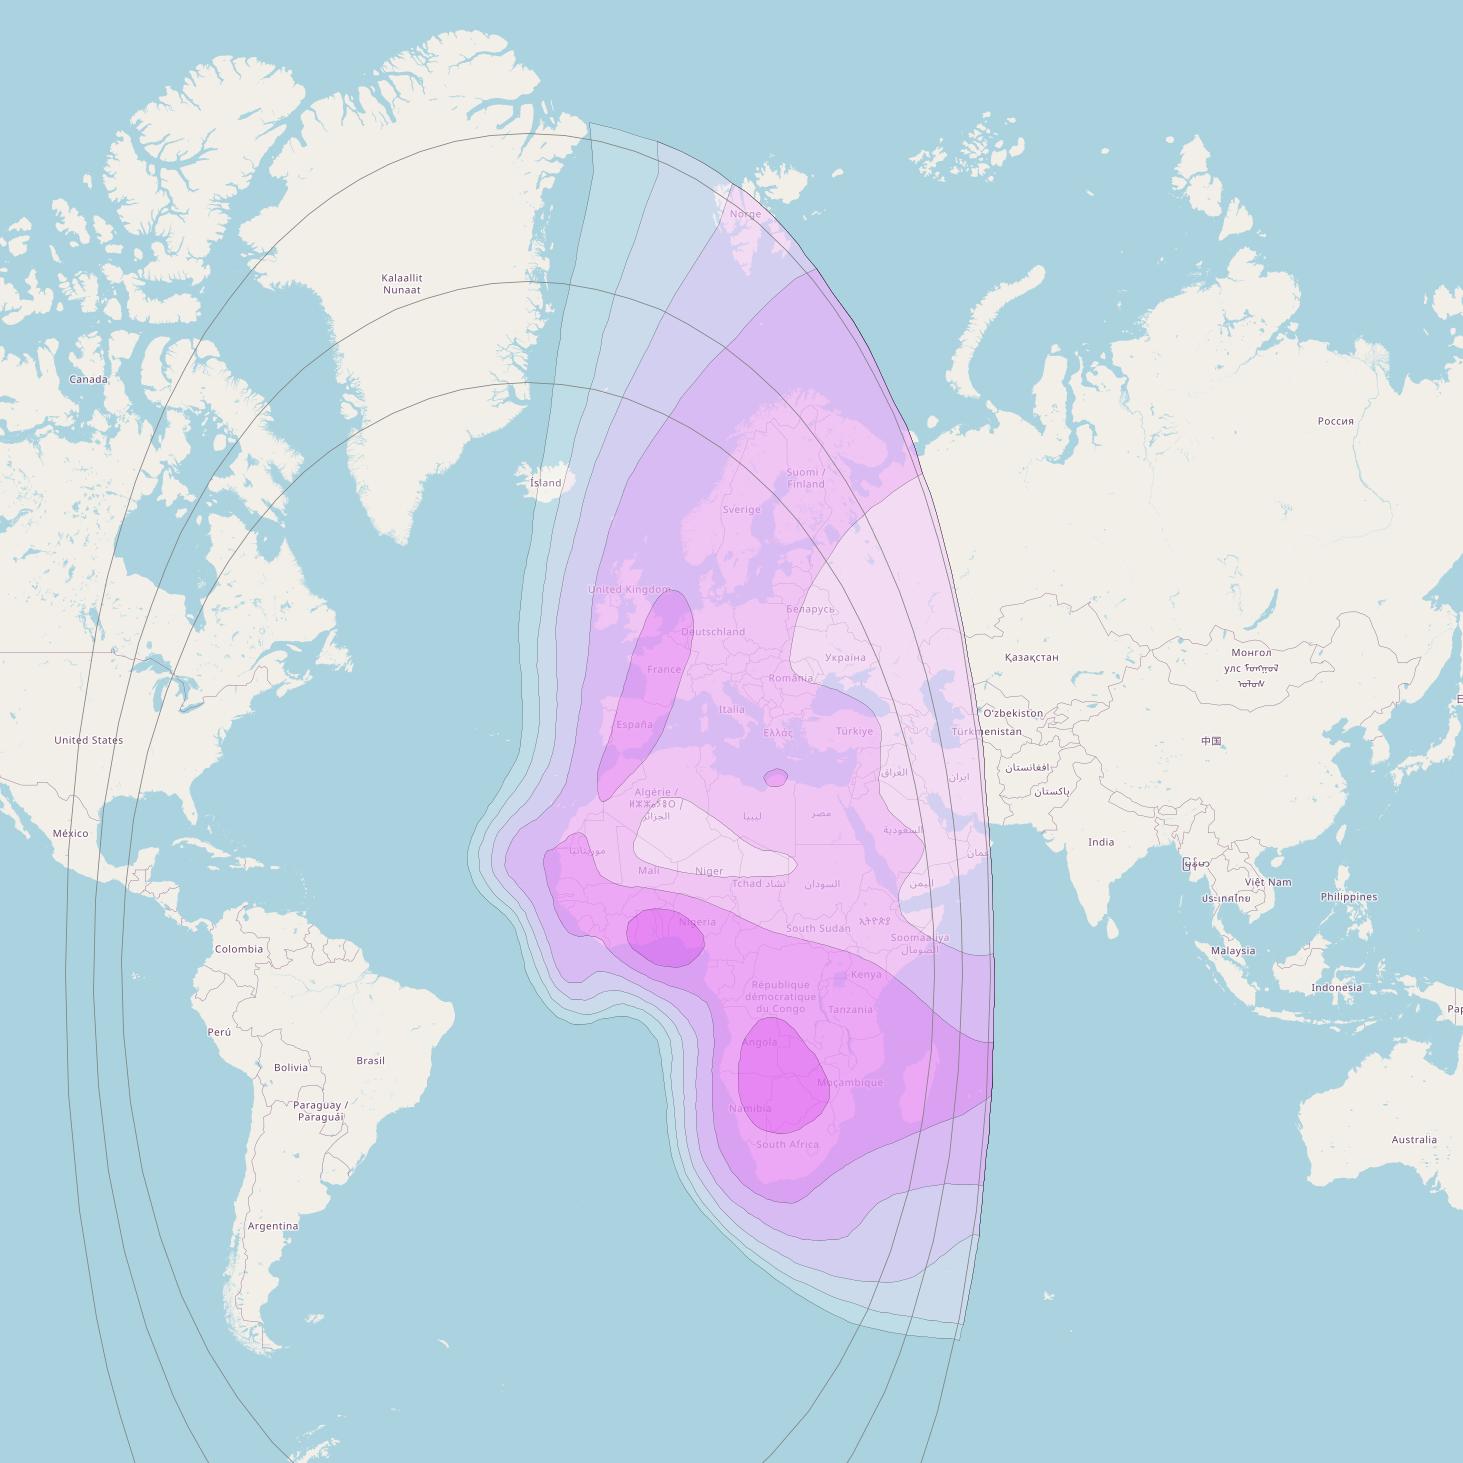 SES 4 at 22° W downlink C-band East Hemi Beam coverage map